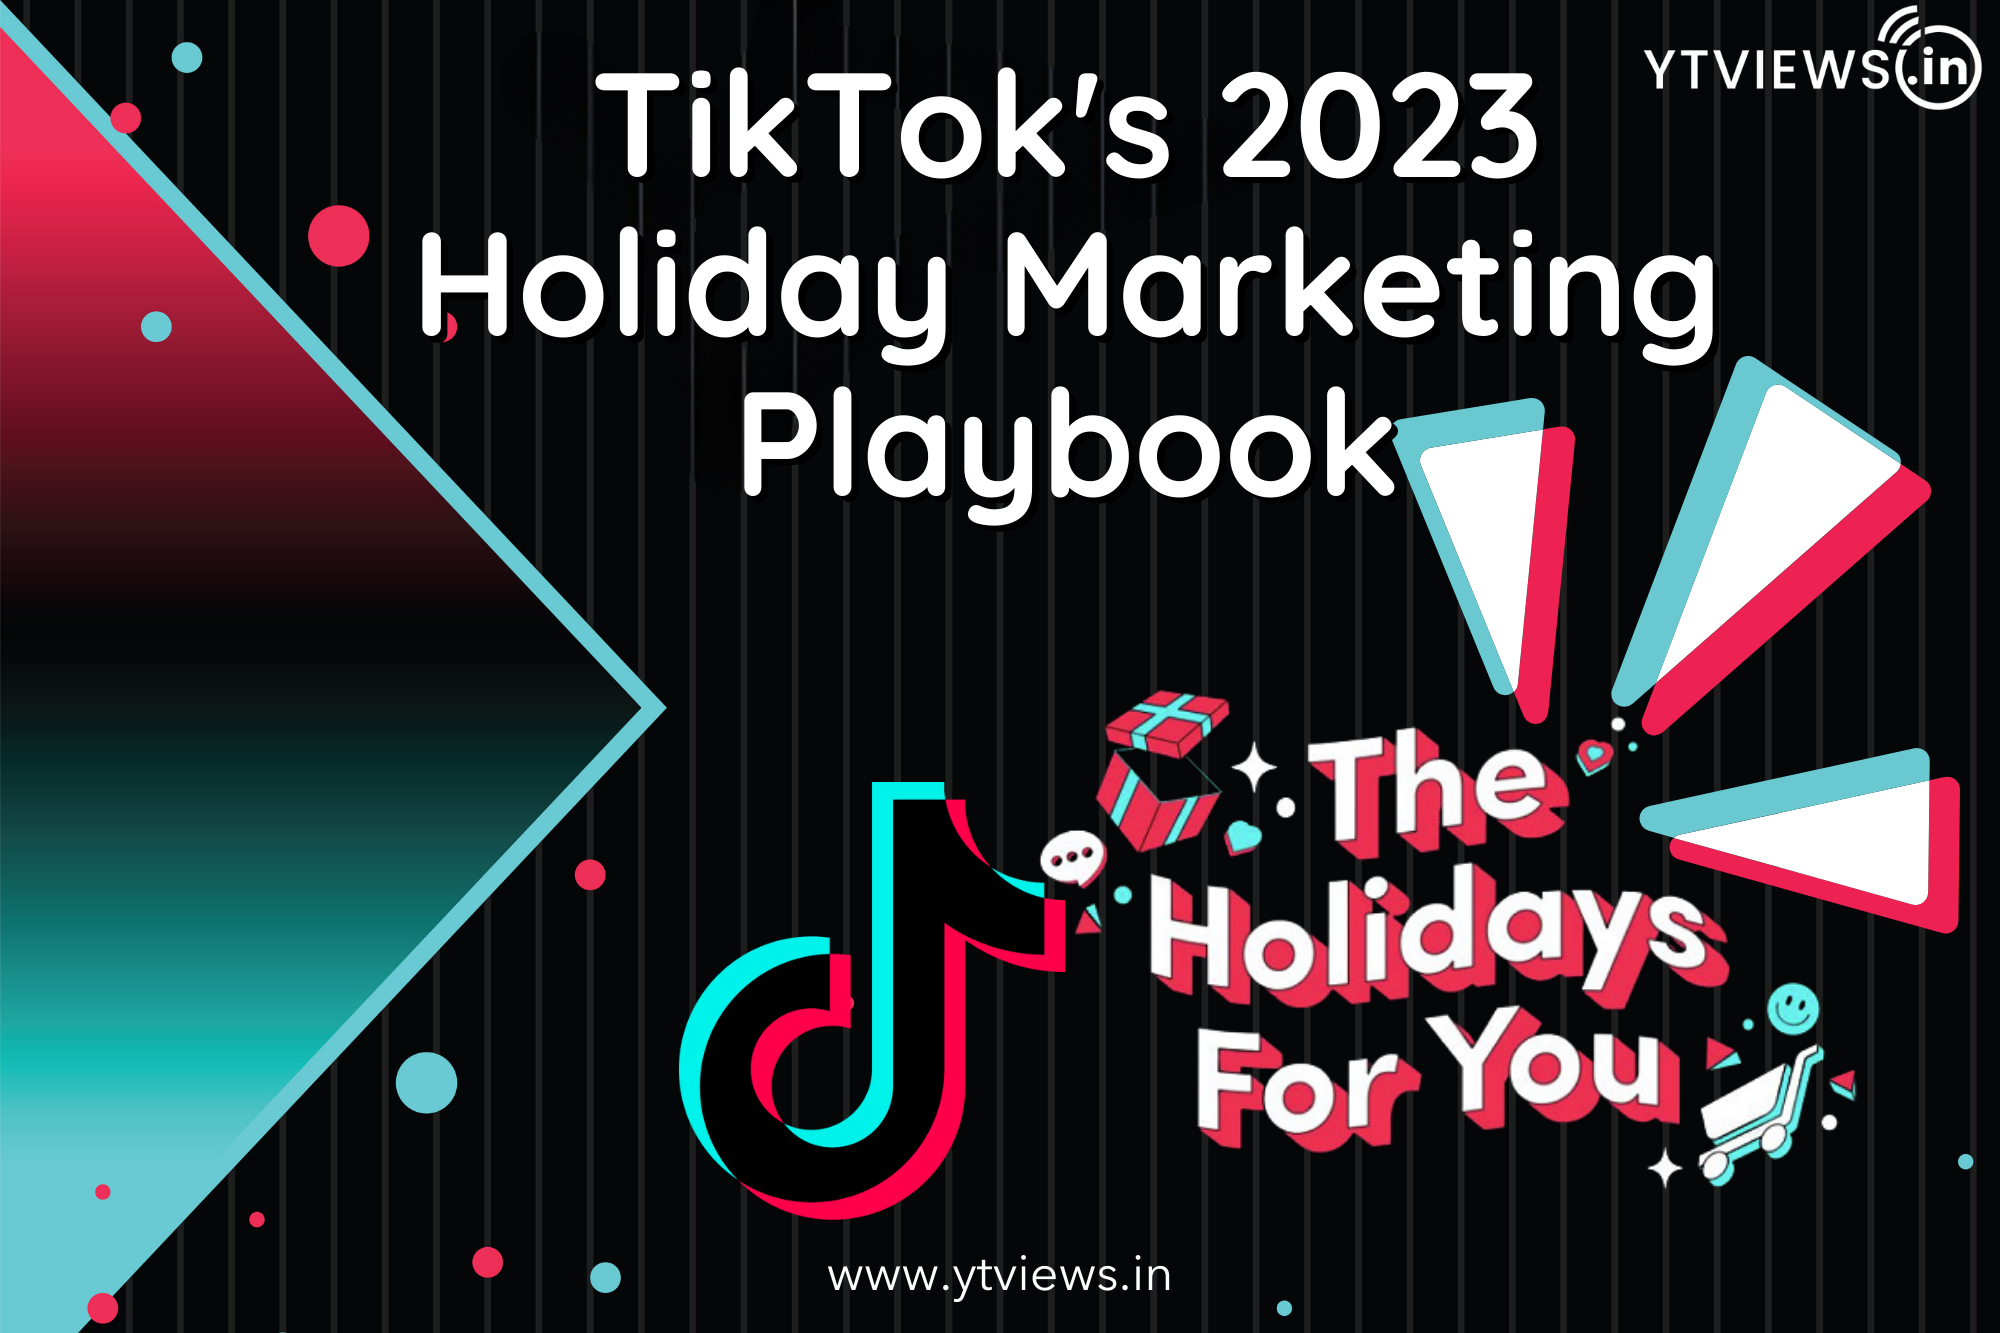 How can TikTok’s newly launched 2023 Holiday Marketing Playbook help in campaign planning?